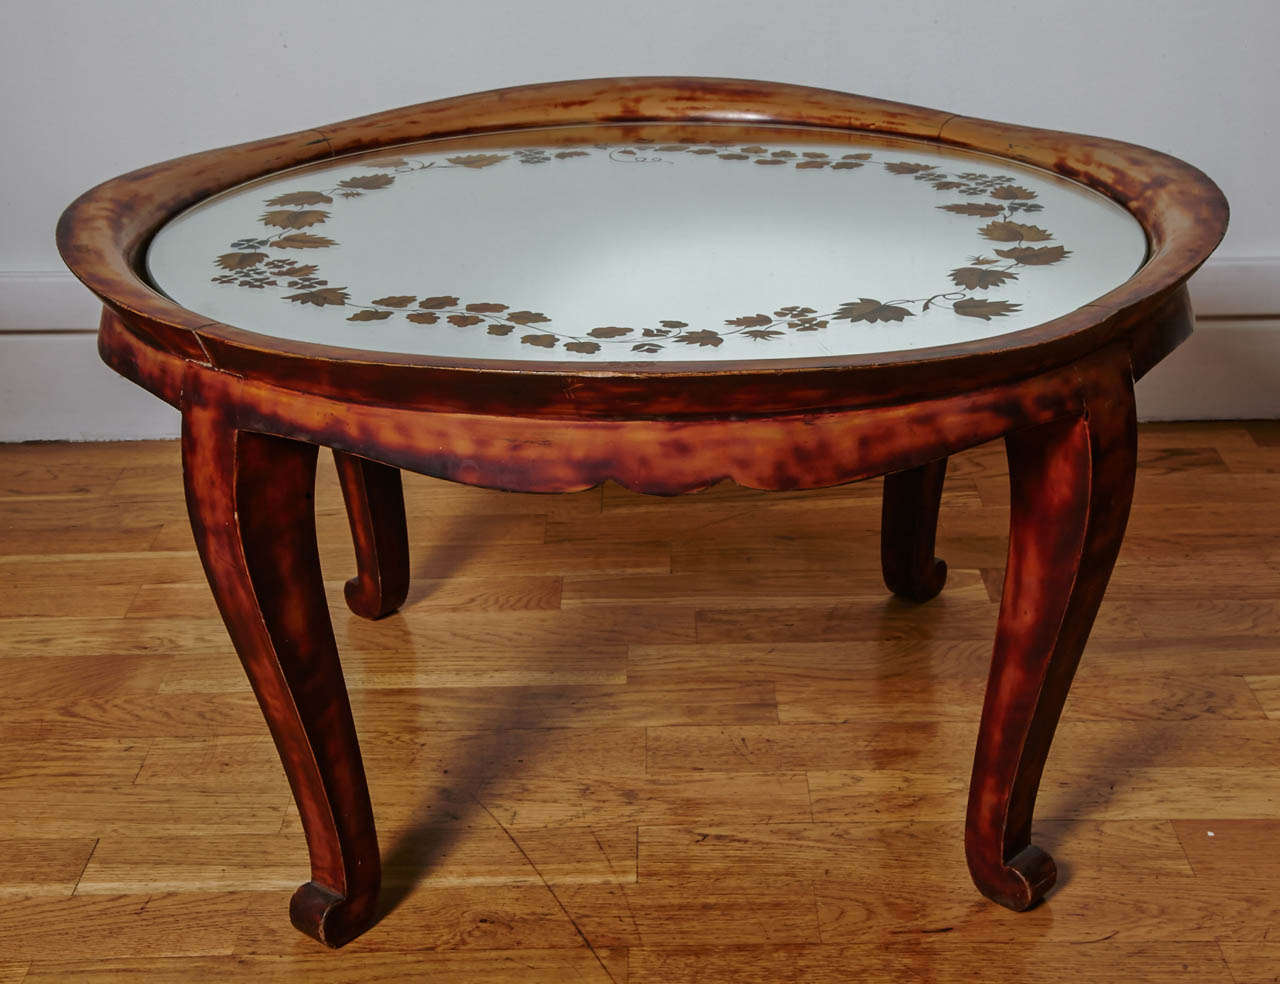 Low coffee table or gue´ridon in irregular turtle-shell color Chinese lacquer. Basin shape top with curved sides. Four shaped legs. Mirror top with a gilded 'e´glomise´' decor of a red and blue flowery branches frieze.

Stamped 'Andre´ Arbus' as